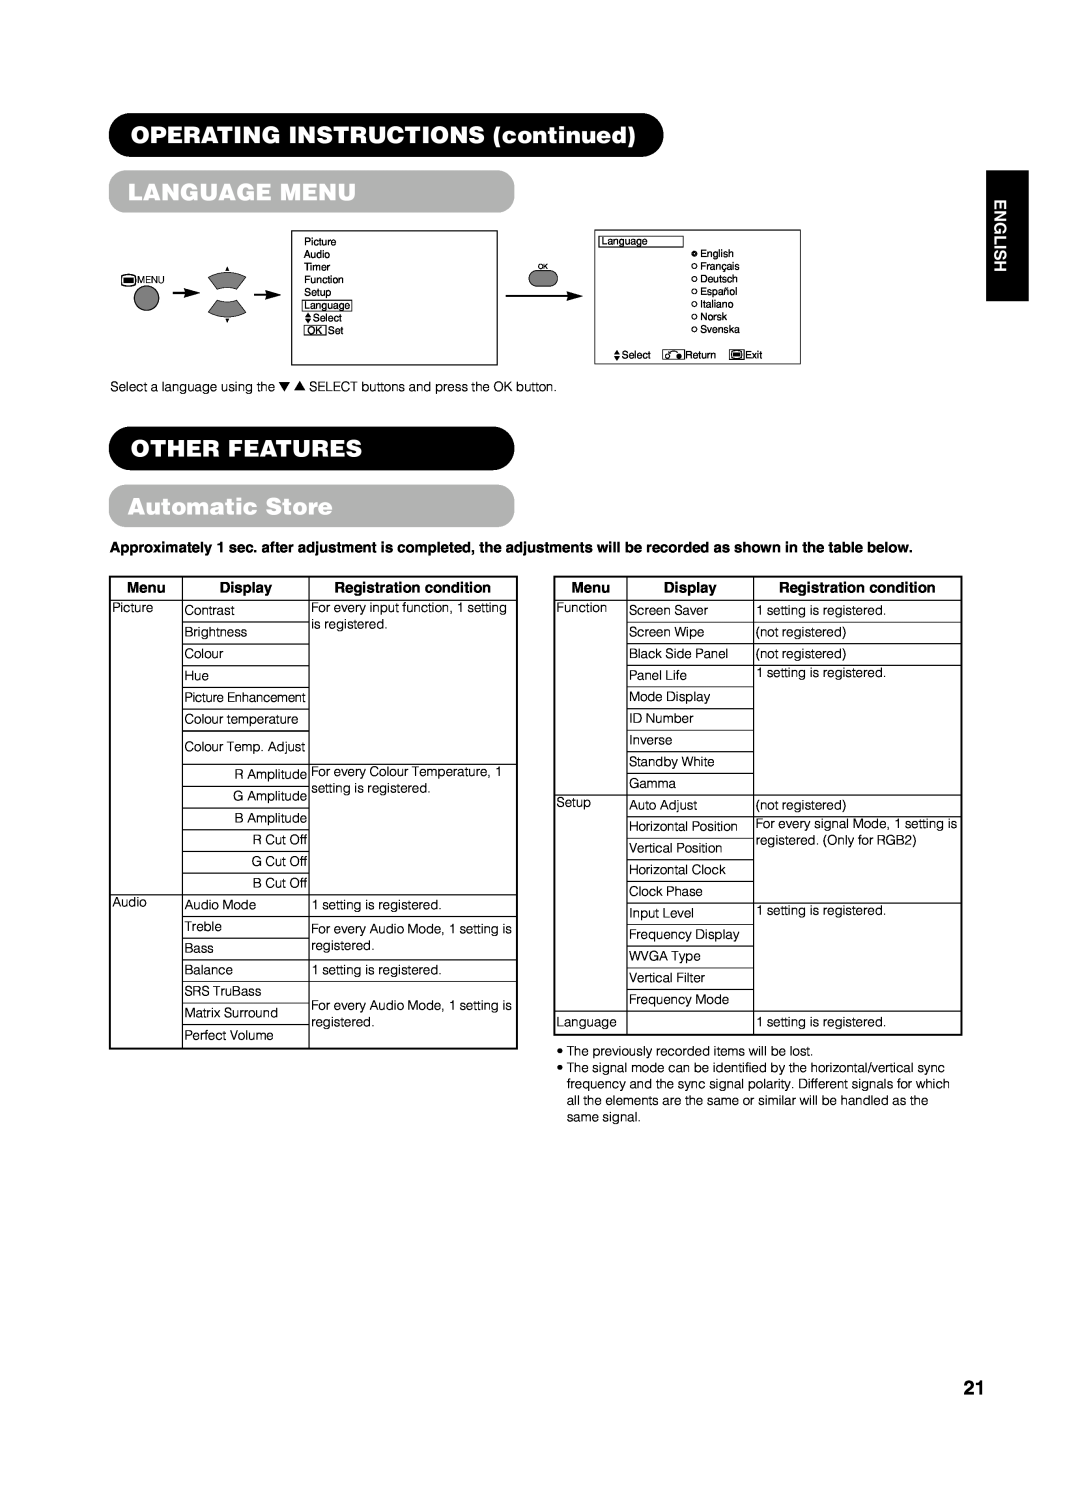 Yamaha PDM-4210E user manual OPERATING INSTRUCTIONS continued LANGUAGE MENU, OTHER FEATURES Automatic Store, English 